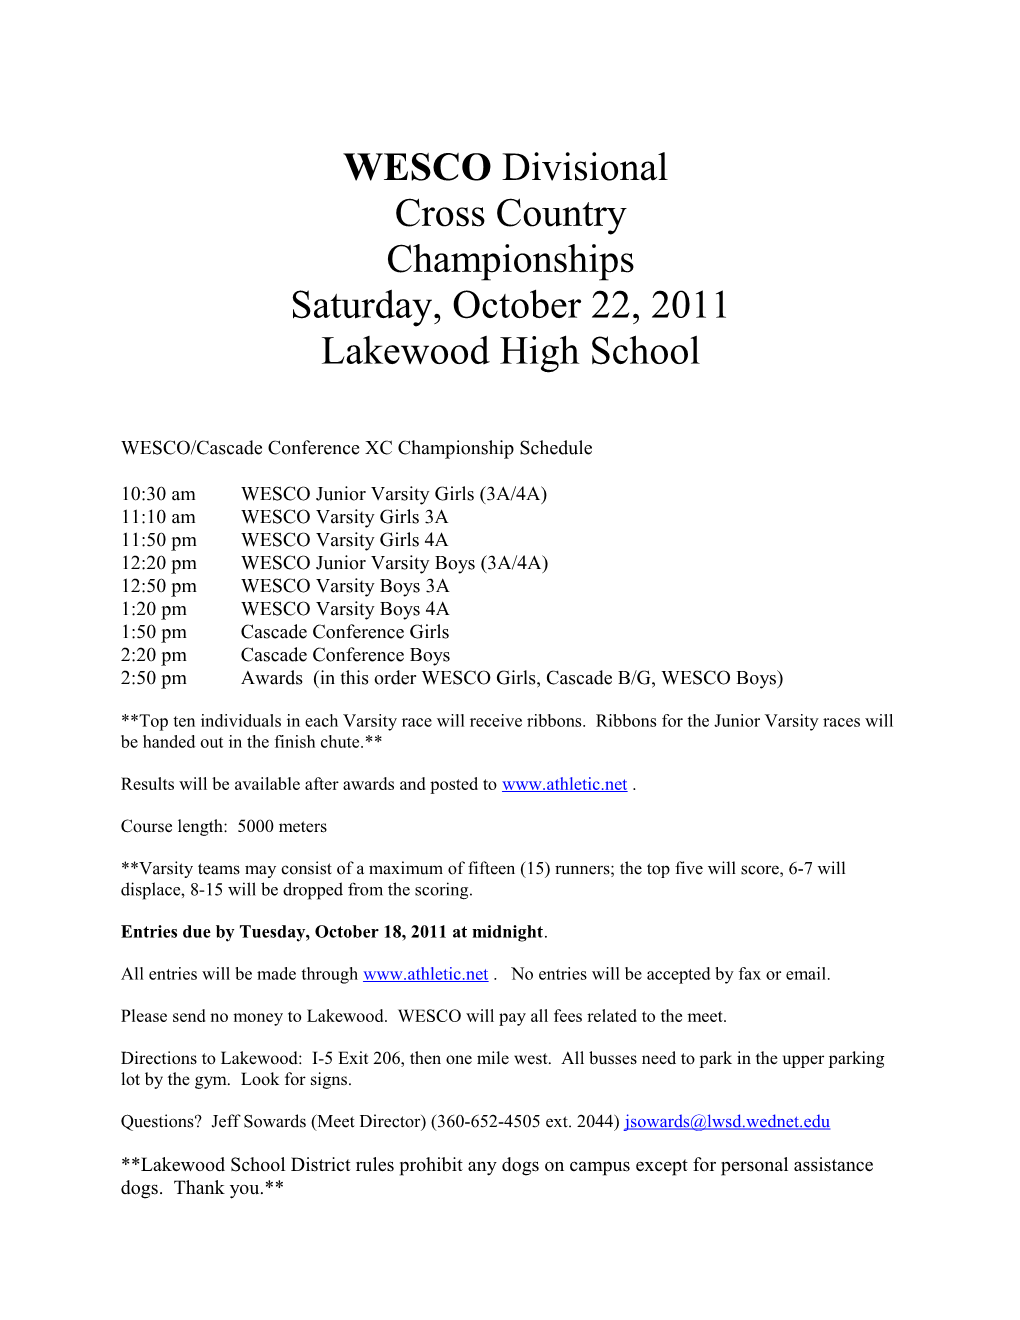 WESCO/Cascade Conference XC Championship Schedule